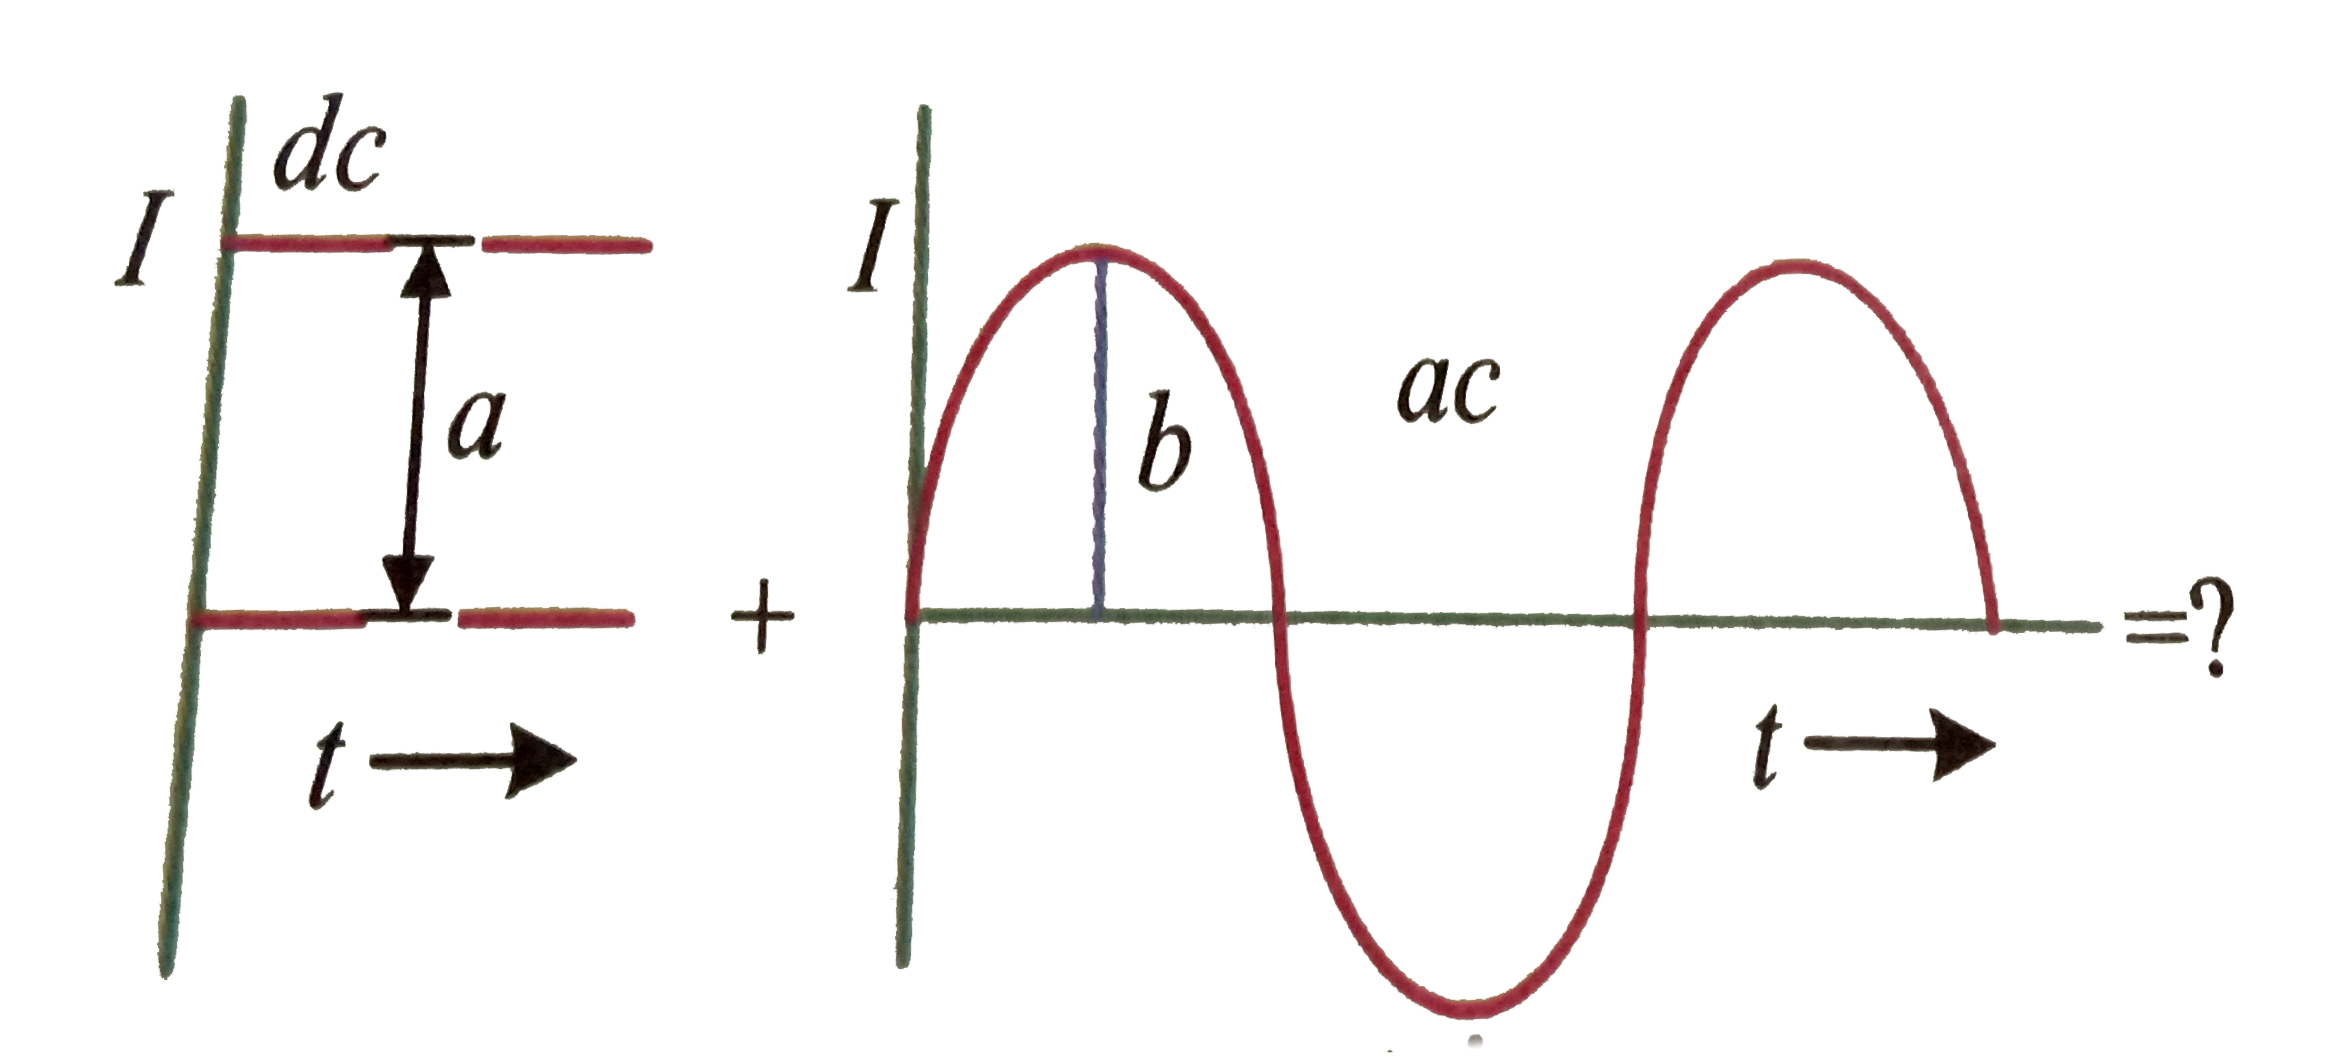 If a direct current of value a ampere is superimposed on an alternating current1 = b sin omega t flowing through a wire, what is the effective value of the resulting current in the circuit?